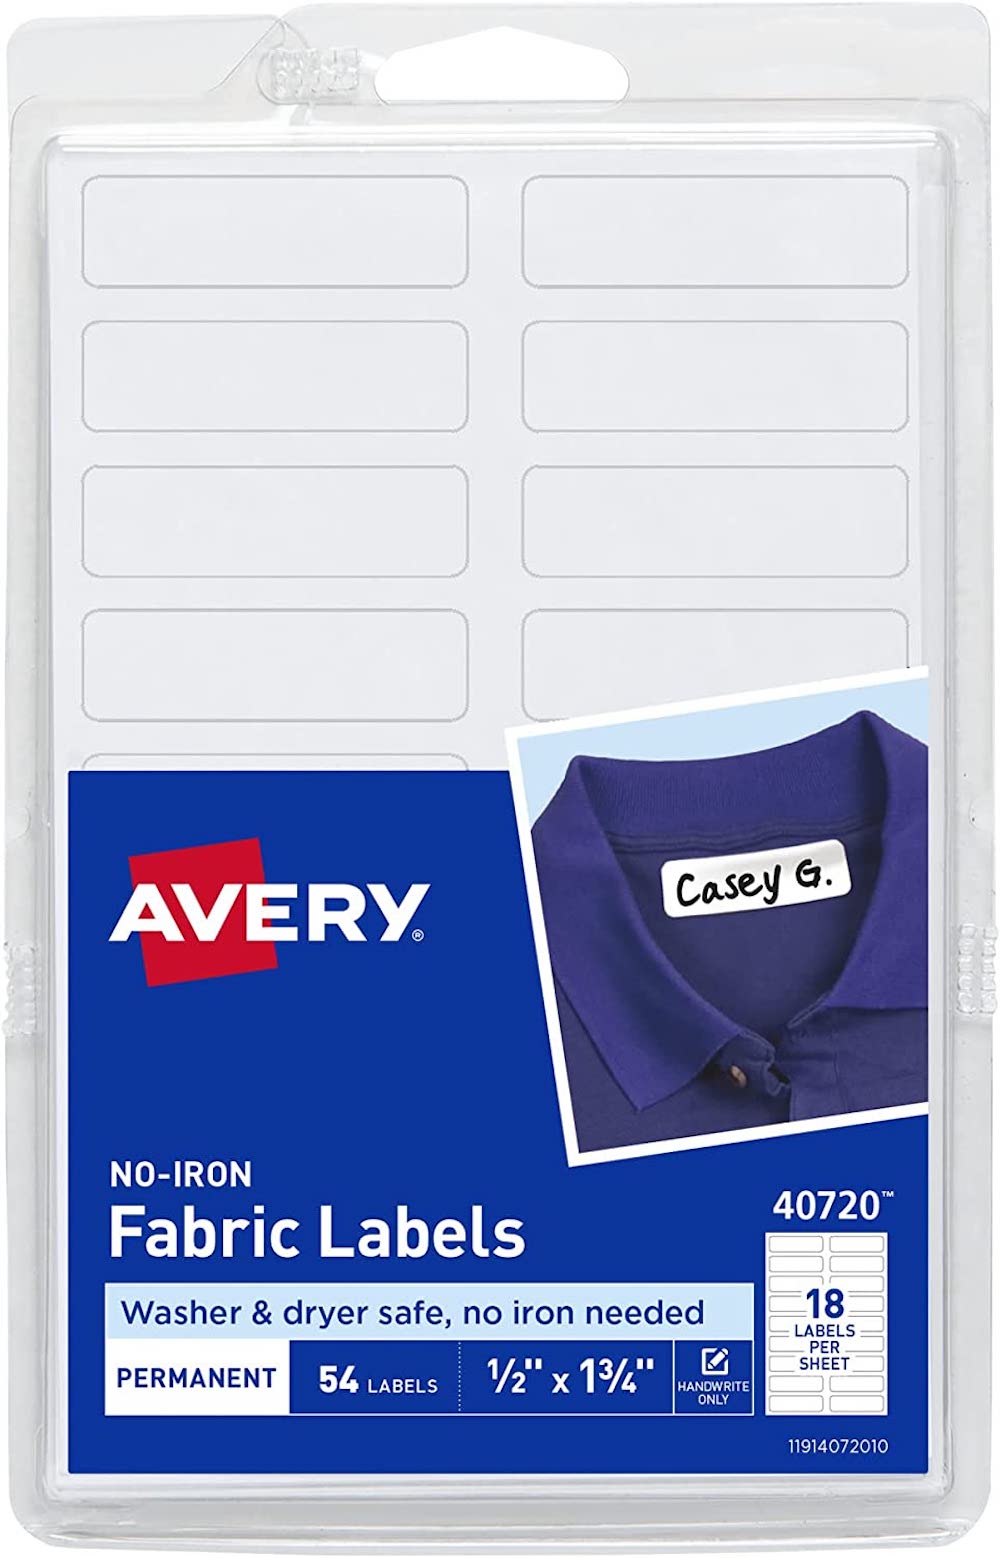 Avery labels